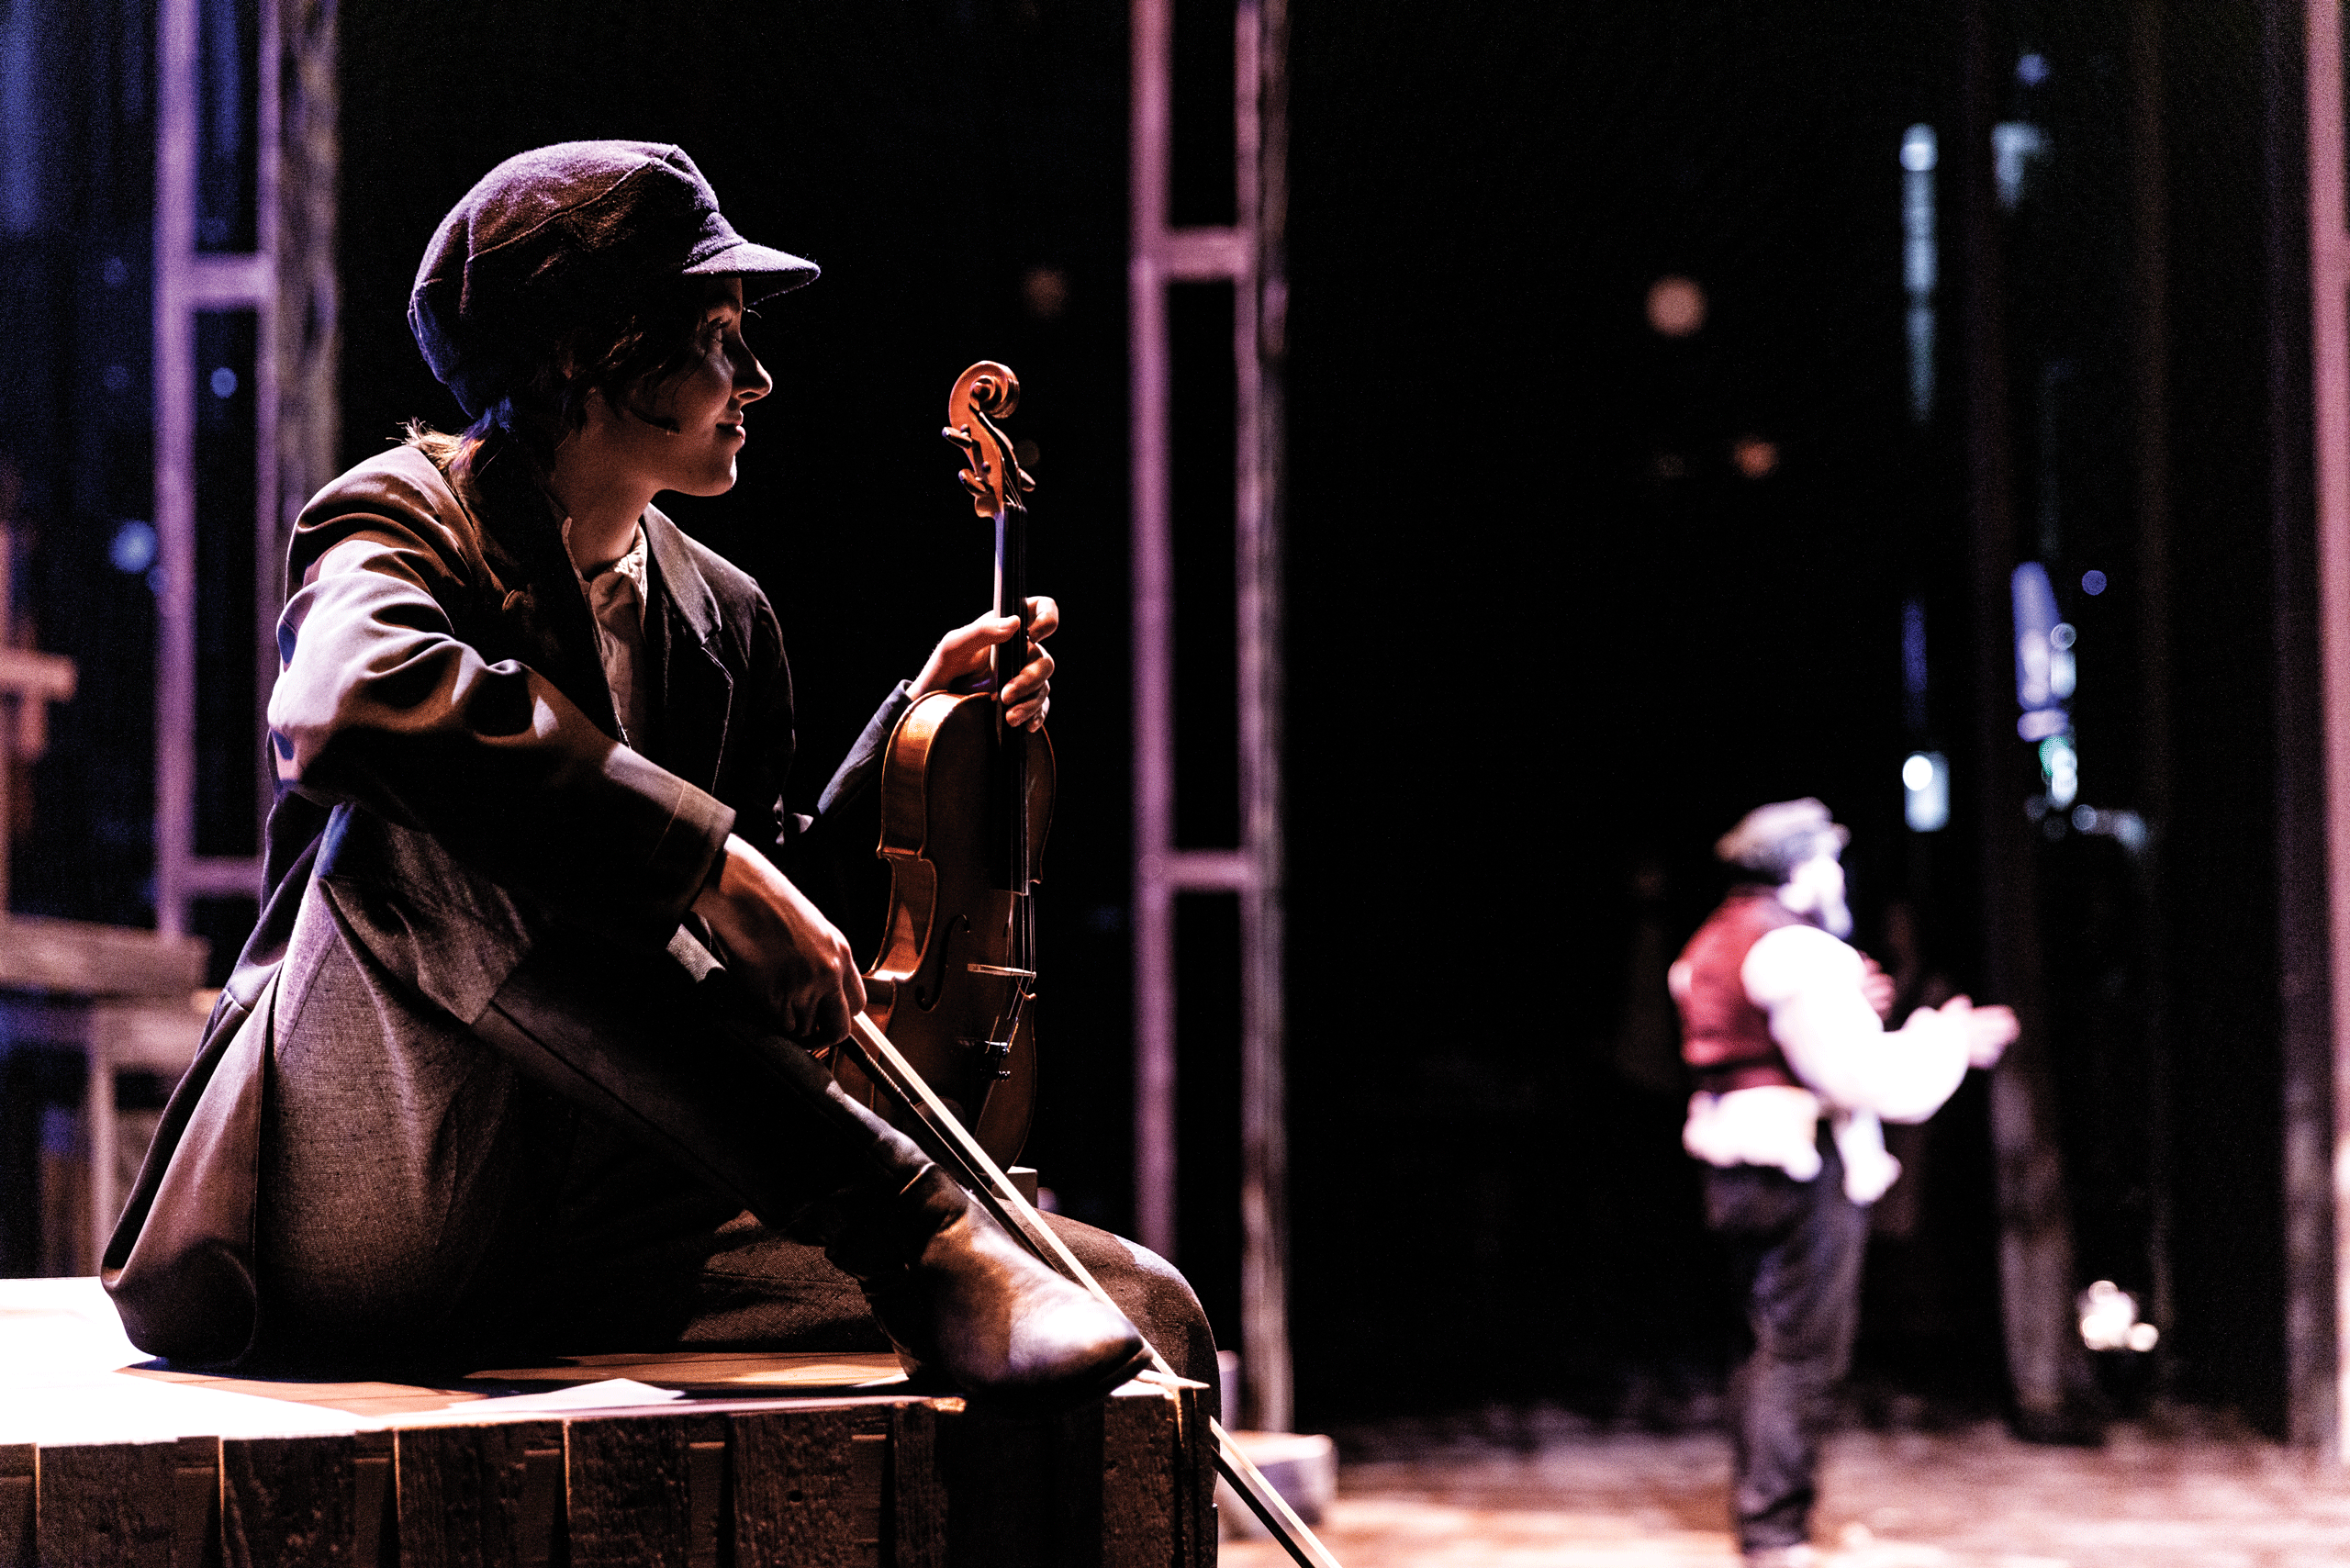 On a stage during a live performance of the Fiddler on the Roof in BYU's de Jong Concert Hall, a female student sits in the foreground holding a violin, gazing at an actor in the background speaking to an audience